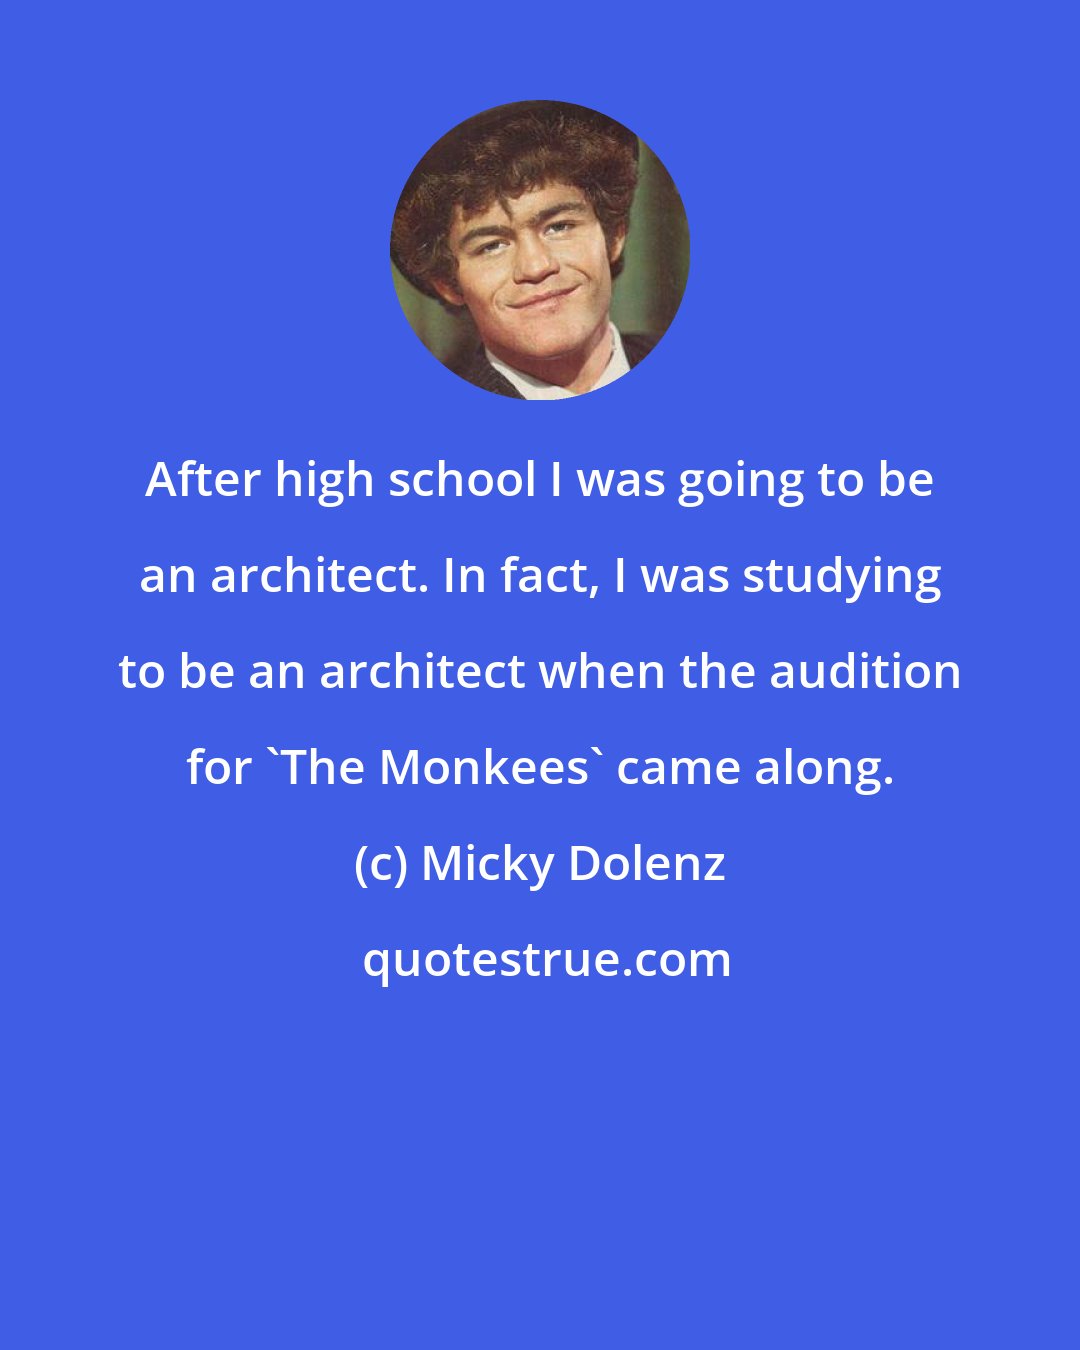 Micky Dolenz: After high school I was going to be an architect. In fact, I was studying to be an architect when the audition for 'The Monkees' came along.